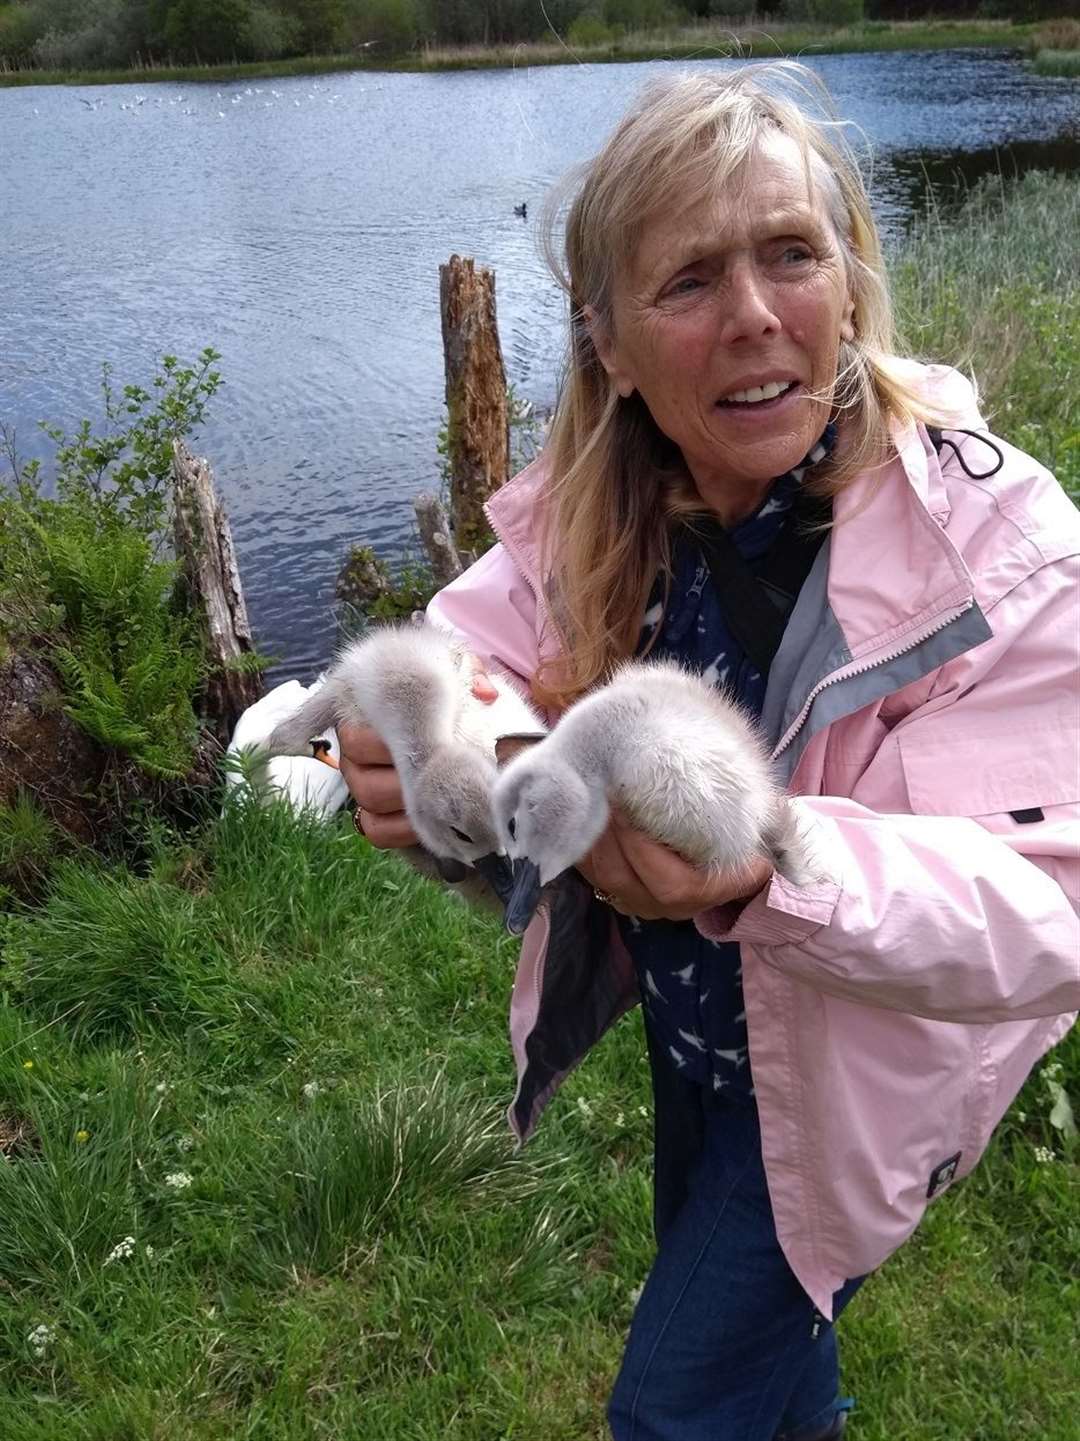 Celia carrying two of the cygnets to safety.